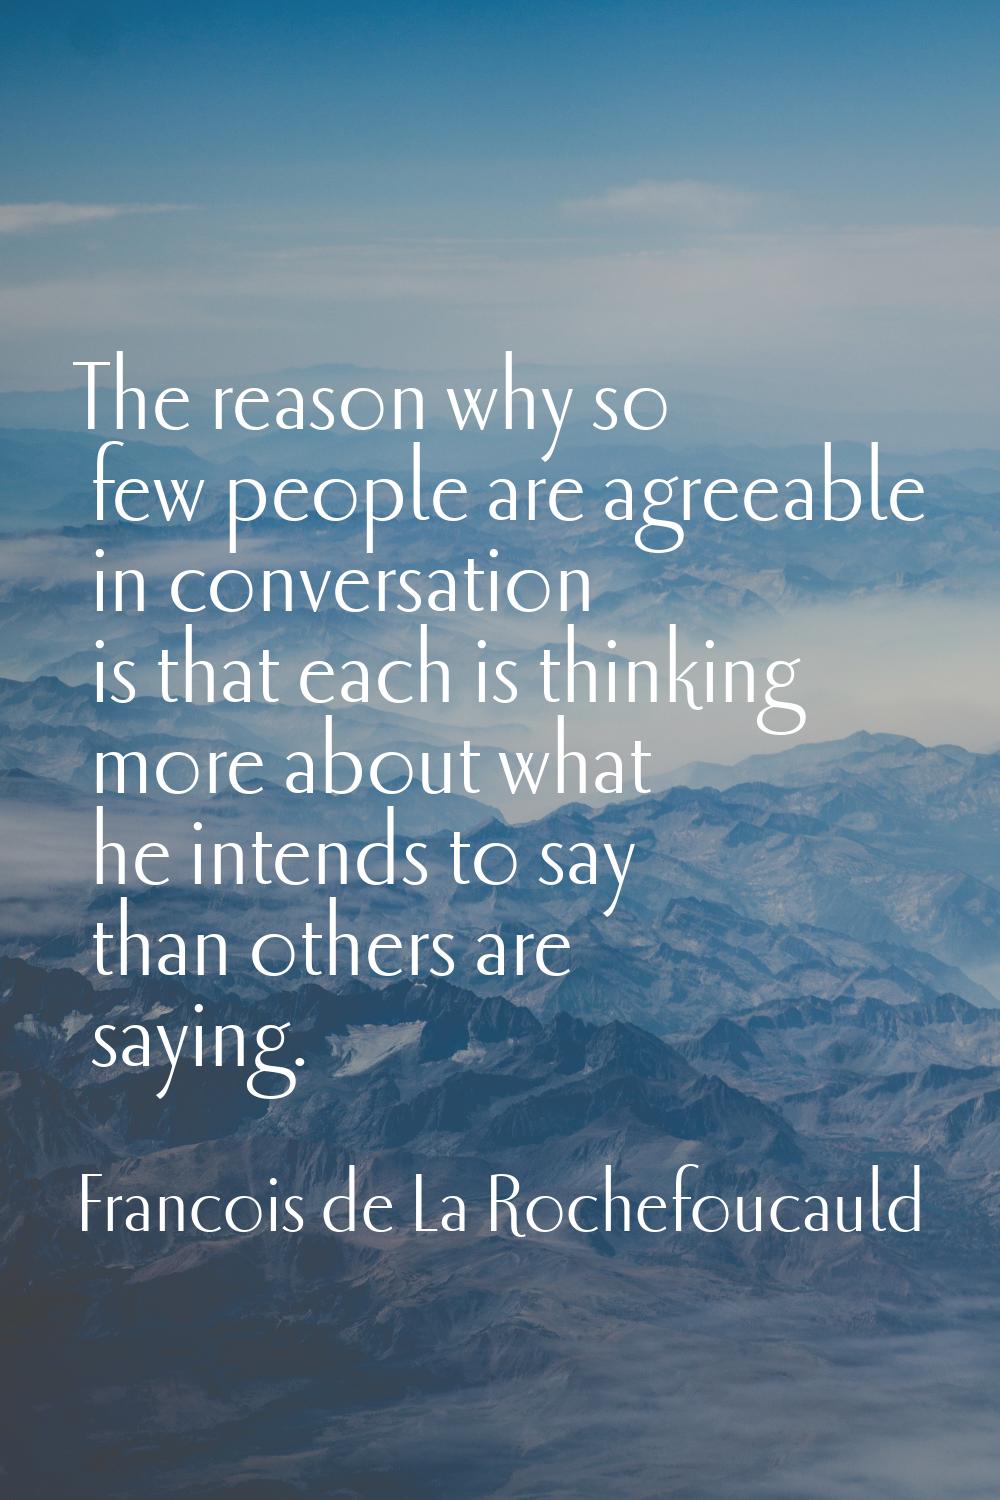 The reason why so few people are agreeable in conversation is that each is thinking more about what